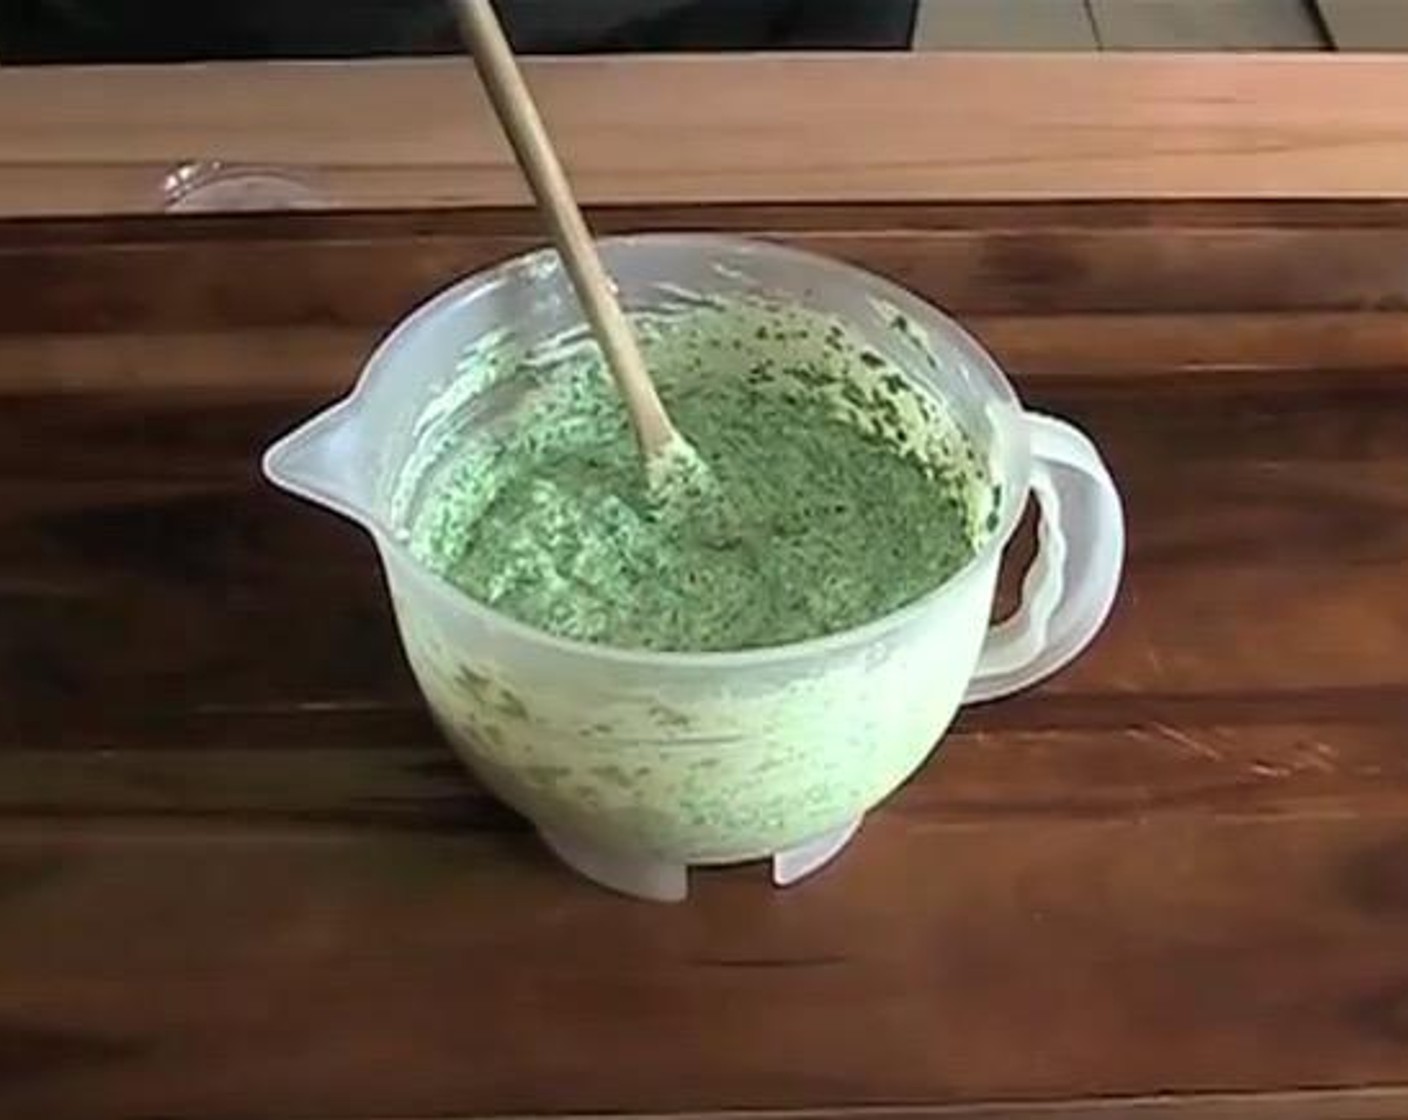 step 1 In a large mixing bowl, add Frozen Spinach (3 1/3 cups), Ricotta Cheese (1 1/4 cups), Sour Cream (1 1/4 cups), French Onion Soup Powder Mix (1/3 cup) and Freshly Ground Black Pepper (to taste). Mix until combined and set aside.